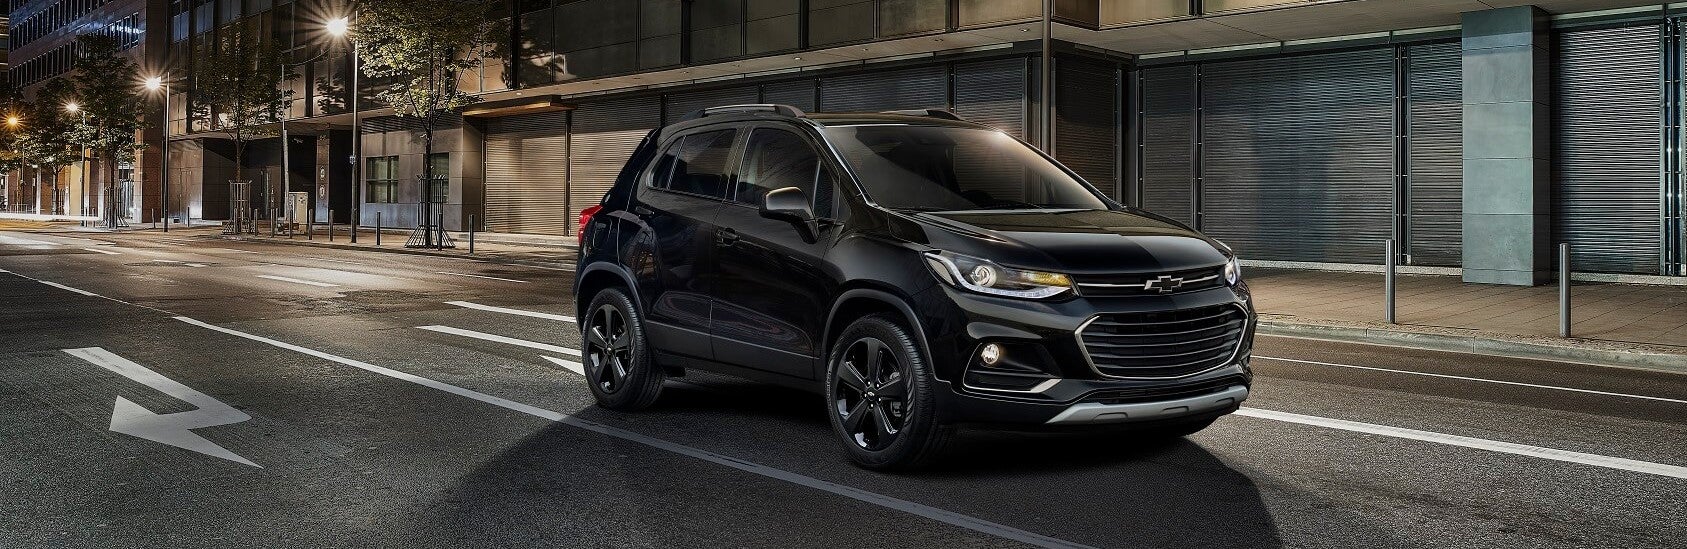 Chevy Trax Accessories